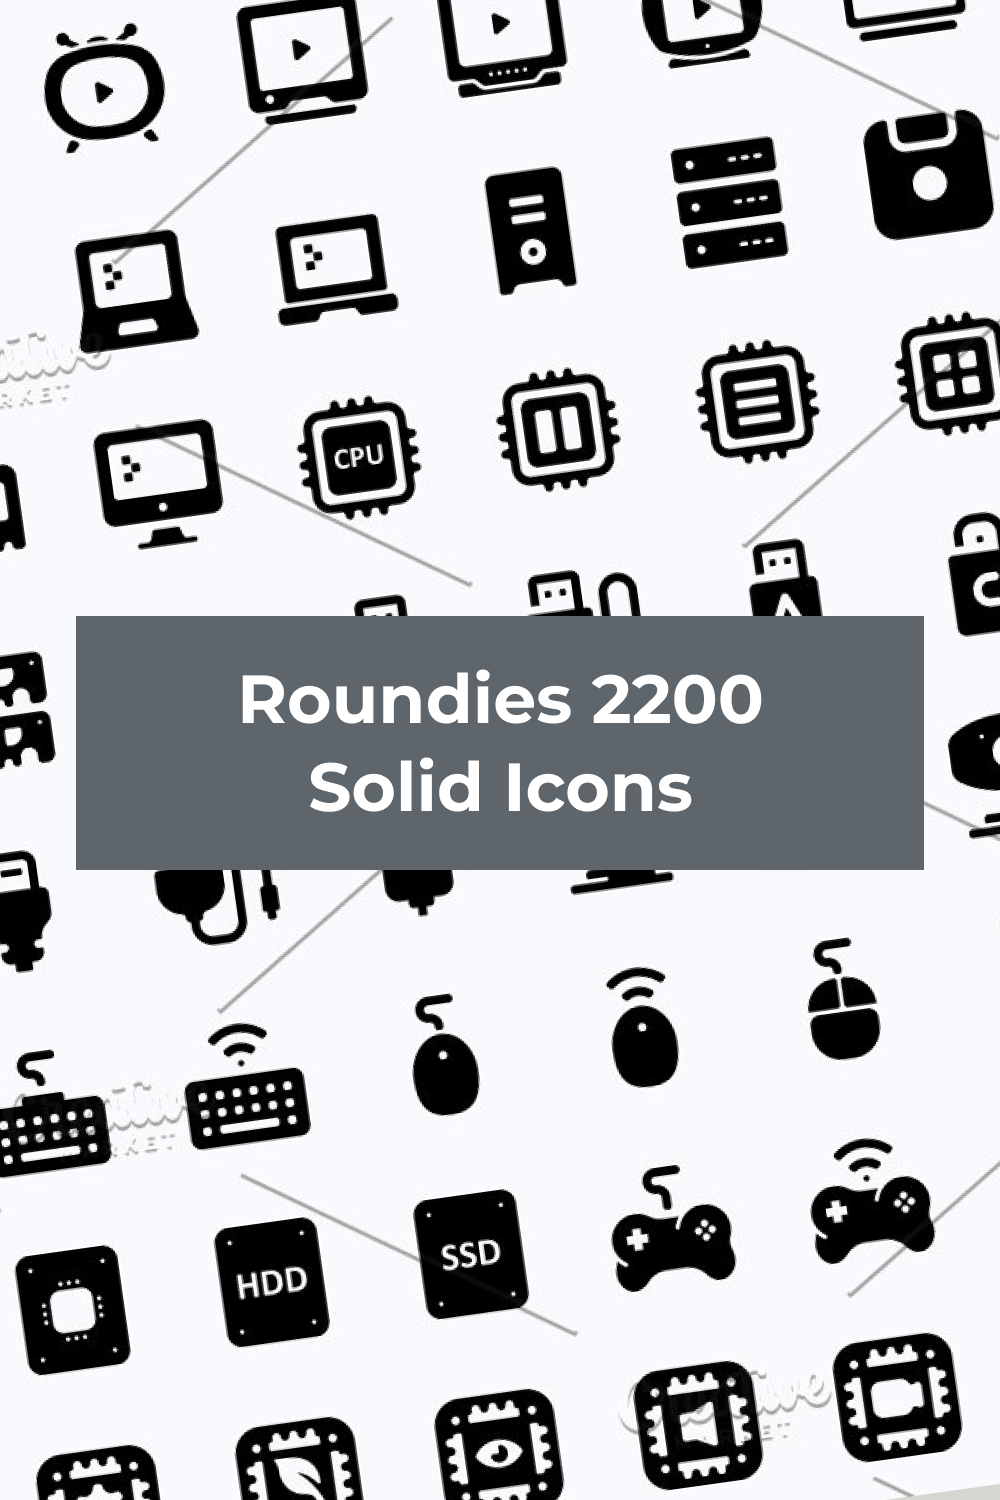 Different sizes solid icons for mobile presentation.